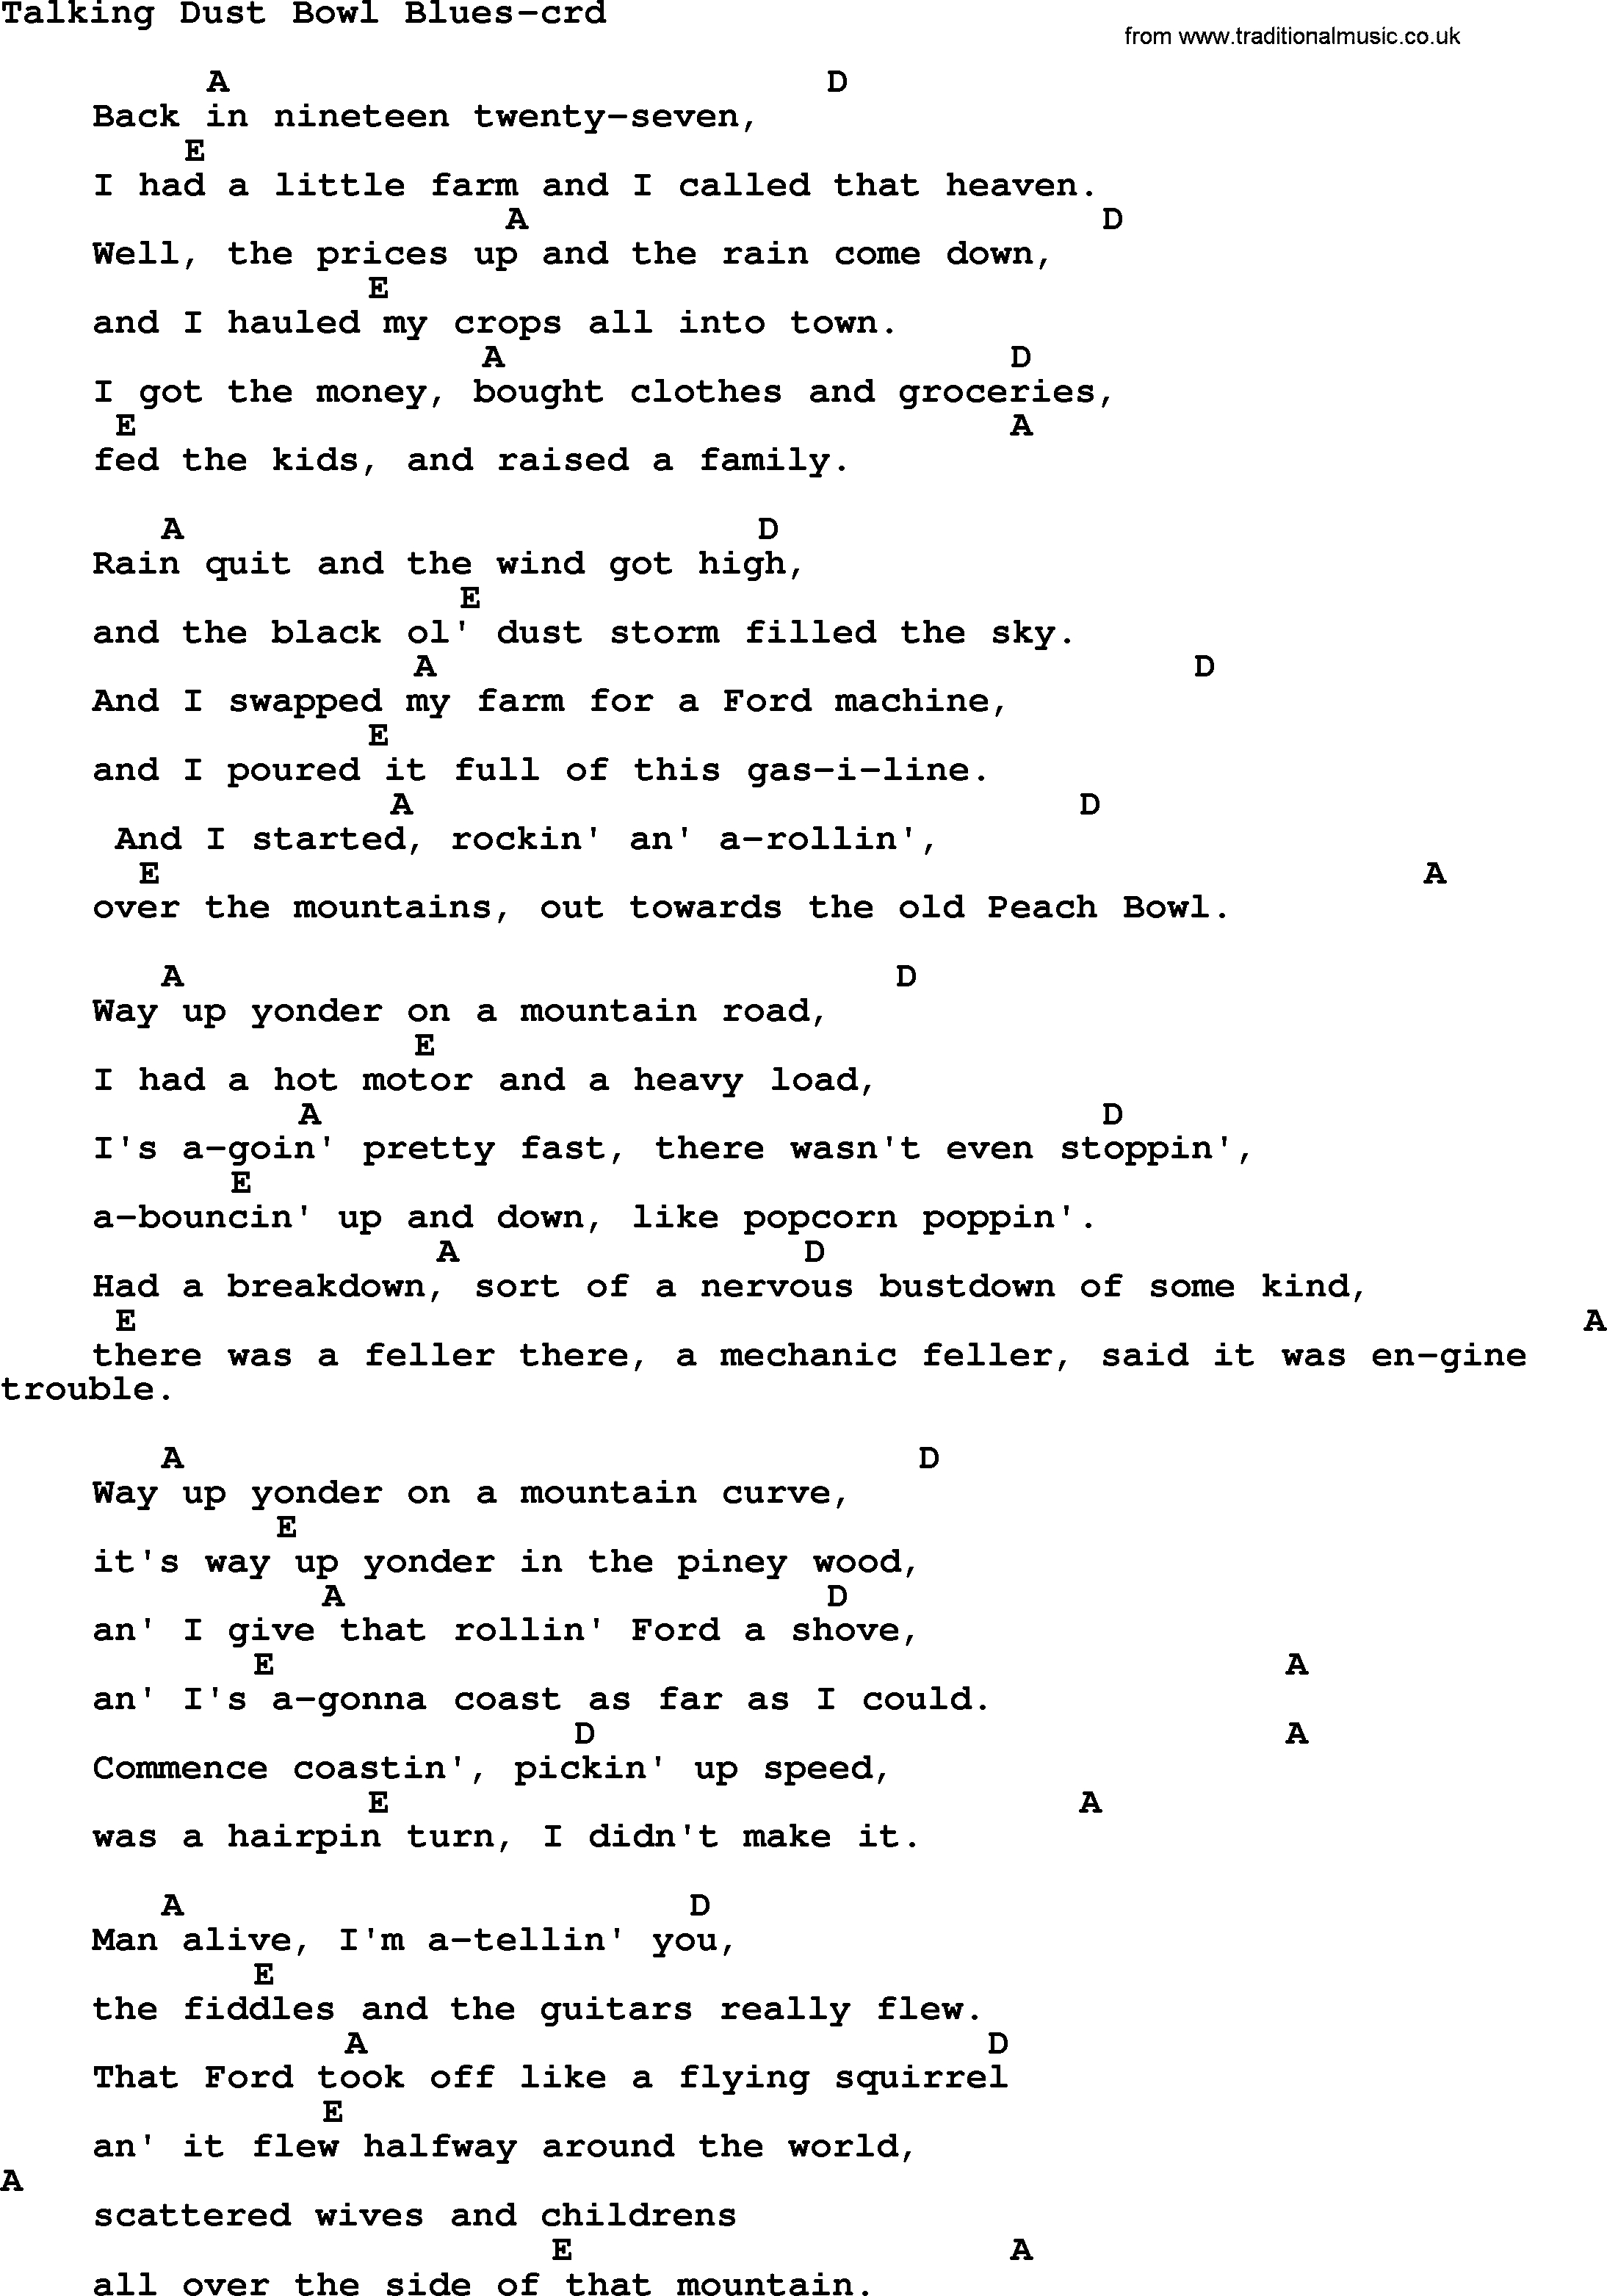 Dust In The Wind Chords Woody Guthrie Song Talking Dust Bowl Blues Lyrics And Chords